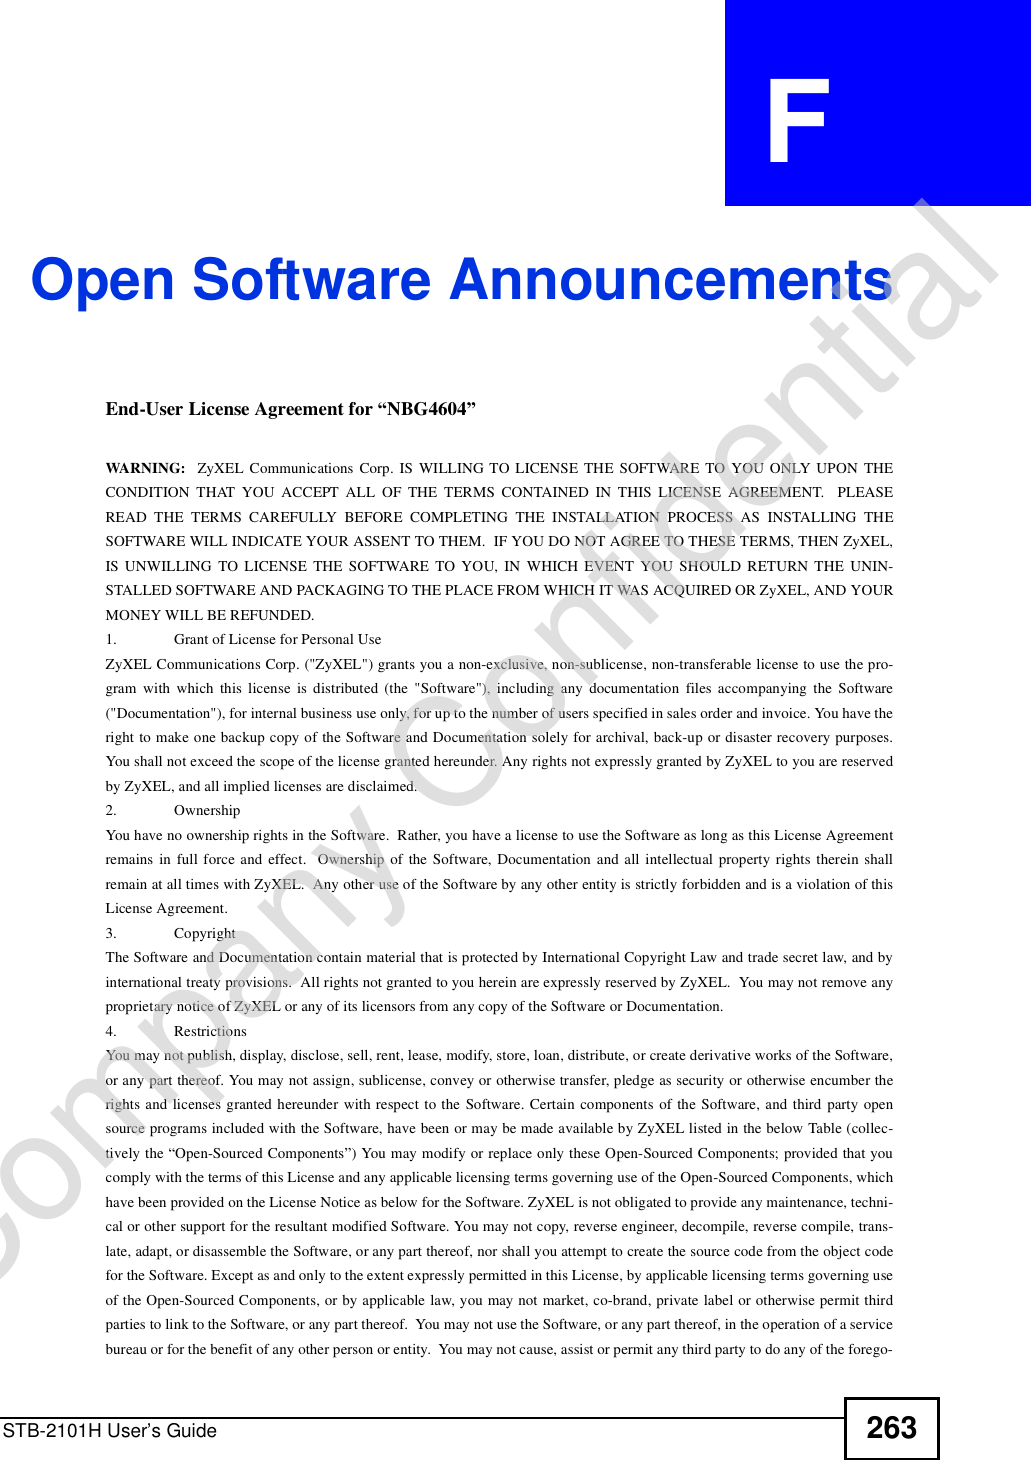 STB-2101H User’s Guide 263APPENDIX  F Open Software AnnouncementsEnd-User License Agreement for “NBG4604” WARNING:  ZyXEL Communications Corp. IS WILLING TO LICENSE THE SOFTWARE TO YOU ONLY UPON THECONDITION THAT YOU ACCEPT ALL OF THE TERMS CONTAINED IN THIS LICENSE AGREEMENT.  PLEASEREAD THE TERMS CAREFULLY BEFORE COMPLETING THE INSTALLATION PROCESS AS INSTALLING THESOFTWARE WILL INDICATE YOUR ASSENT TO THEM.  IF YOU DO NOT AGREE TO THESE TERMS, THEN ZyXEL,IS UNWILLING TO LICENSE THE SOFTWARE TO YOU, IN WHICH EVENT YOU SHOULD RETURN THE UNIN-STALLED SOFTWARE AND PACKAGING TO THE PLACE FROM WHICH IT WAS ACQUIRED OR ZyXEL, AND YOURMONEY WILL BE REFUNDED.1.Grant of License for Personal UseZyXEL Communications Corp. (&quot;ZyXEL&quot;) grants you a non-exclusive, non-sublicense, non-transferable license to use the pro-gram with which this license is distributed (the &quot;Software&quot;), including any documentation files accompanying the Software(&quot;Documentation&quot;), for internal business use only, for up to the number of users specified in sales order and invoice. You have theright to make one backup copy of the Software and Documentation solely for archival, back-up or disaster recovery purposes.You shall not exceed the scope of the license granted hereunder. Any rights not expressly granted by ZyXEL to you are reservedby ZyXEL, and all implied licenses are disclaimed.2.OwnershipYou have no ownership rights in the Software.  Rather, you have a license to use the Software as long as this License Agreementremains in full force and effect.  Ownership of the Software, Documentation and all intellectual property rights therein shallremain at all times with ZyXEL.  Any other use of the Software by any other entity is strictly forbidden and is a violation of thisLicense Agreement.3.CopyrightThe Software and Documentation contain material that is protected by International Copyright Law and trade secret law, and byinternational treaty provisions.  All rights not granted to you herein are expressly reserved by ZyXEL.  You may not remove anyproprietary notice of ZyXEL or any of its licensors from any copy of the Software or Documentation.4.RestrictionsYou may not publish, display, disclose, sell, rent, lease, modify, store, loan, distribute, or create derivative works of the Software,or any part thereof. You may not assign, sublicense, convey or otherwise transfer, pledge as security or otherwise encumber therights and licenses granted hereunder with respect to the Software. Certain components of the Software, and third party opensource programs included with the Software, have been or may be made available by ZyXEL listed in the below Table (collec-tively the “Open-Sourced Components”) You may modify or replace only these Open-Sourced Components; provided that youcomply with the terms of this License and any applicable licensing terms governing use of the Open-Sourced Components, whichhave been provided on the License Notice as below for the Software. ZyXEL is not obligated to provide any maintenance, techni-cal or other support for the resultant modified Software. You may not copy, reverse engineer, decompile, reverse compile, trans-late, adapt, or disassemble the Software, or any part thereof, nor shall you attempt to create the source code from the object codefor the Software. Except as and only to the extent expressly permitted in this License, by applicable licensing terms governing useof the Open-Sourced Components, or by applicable law, you may not market, co-brand, private label or otherwise permit thirdparties to link to the Software, or any part thereof.  You may not use the Software, or any part thereof, in the operation of a servicebureau or for the benefit of any other person or entity.  You may not cause, assist or permit any third party to do any of the forego-Company Confidential